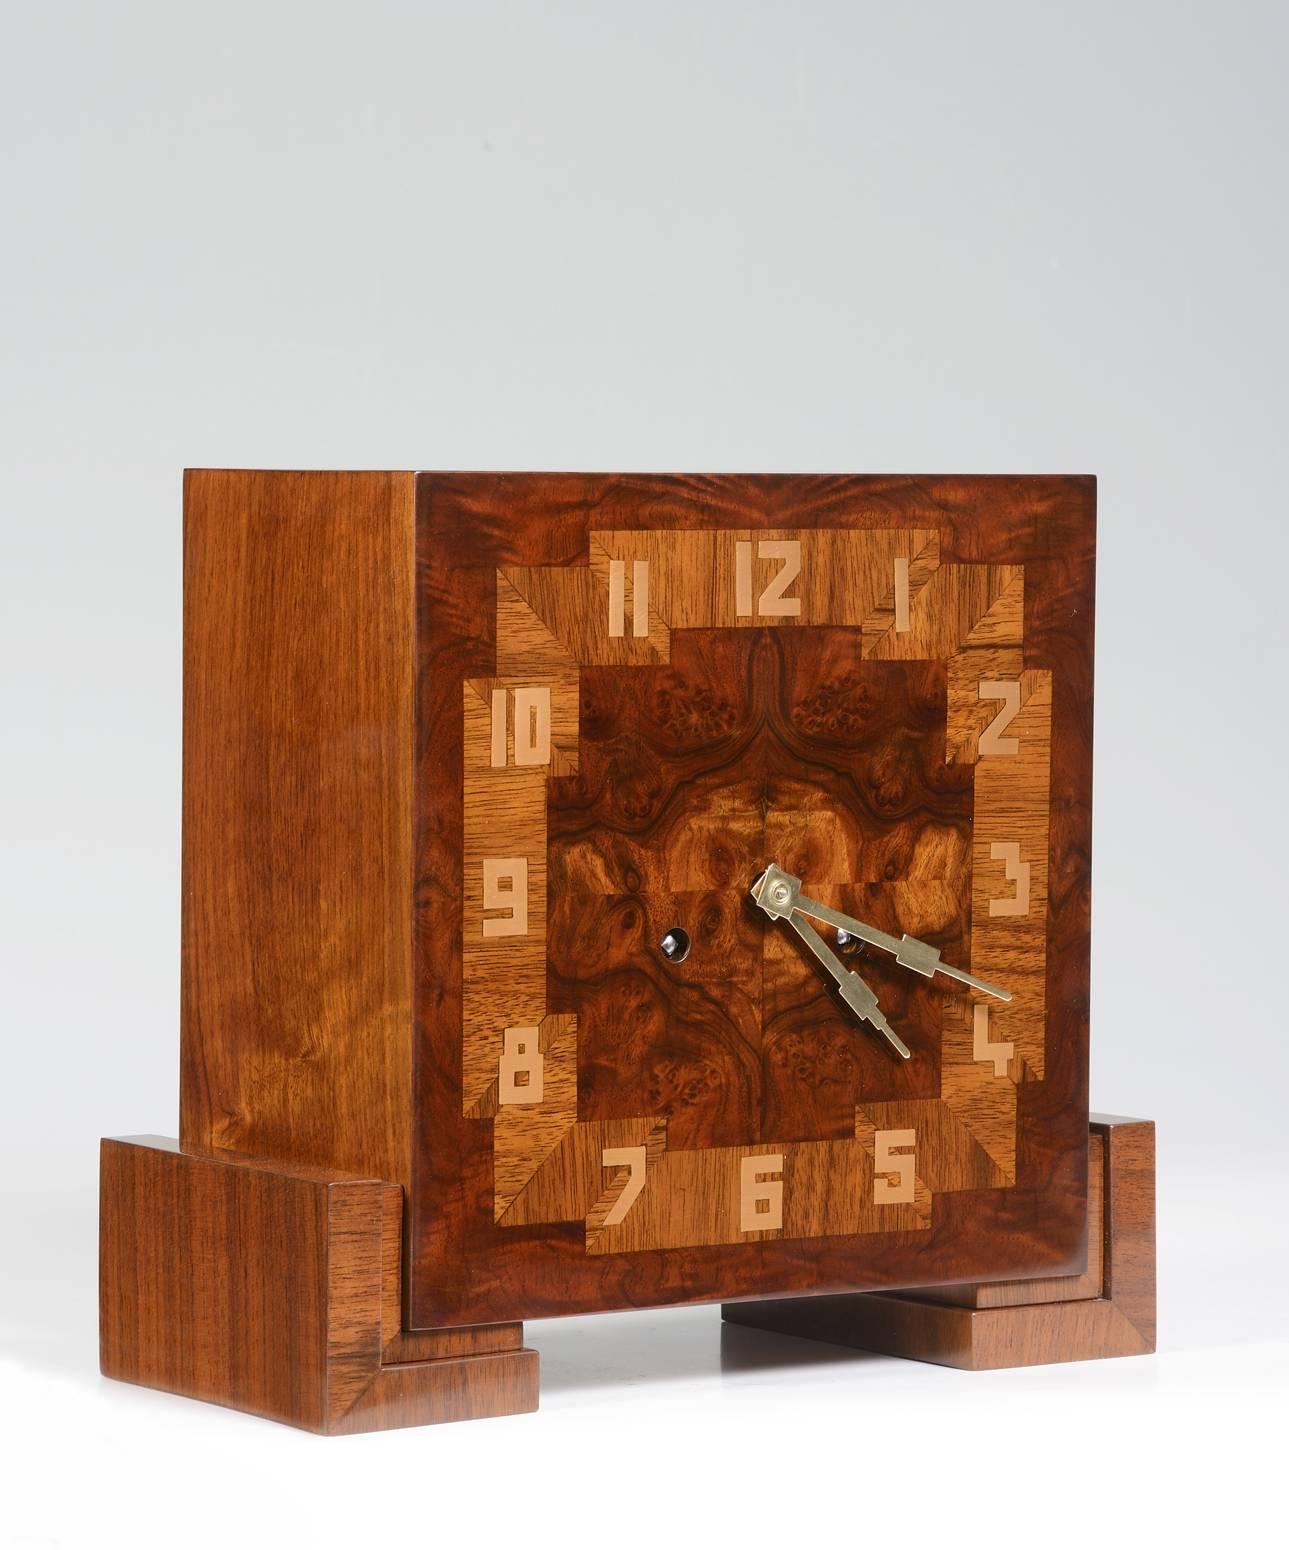 Burl walnut veneer with fruit wood inlays. Brass numerals and 3 day movement.
By Hartmut Moller.